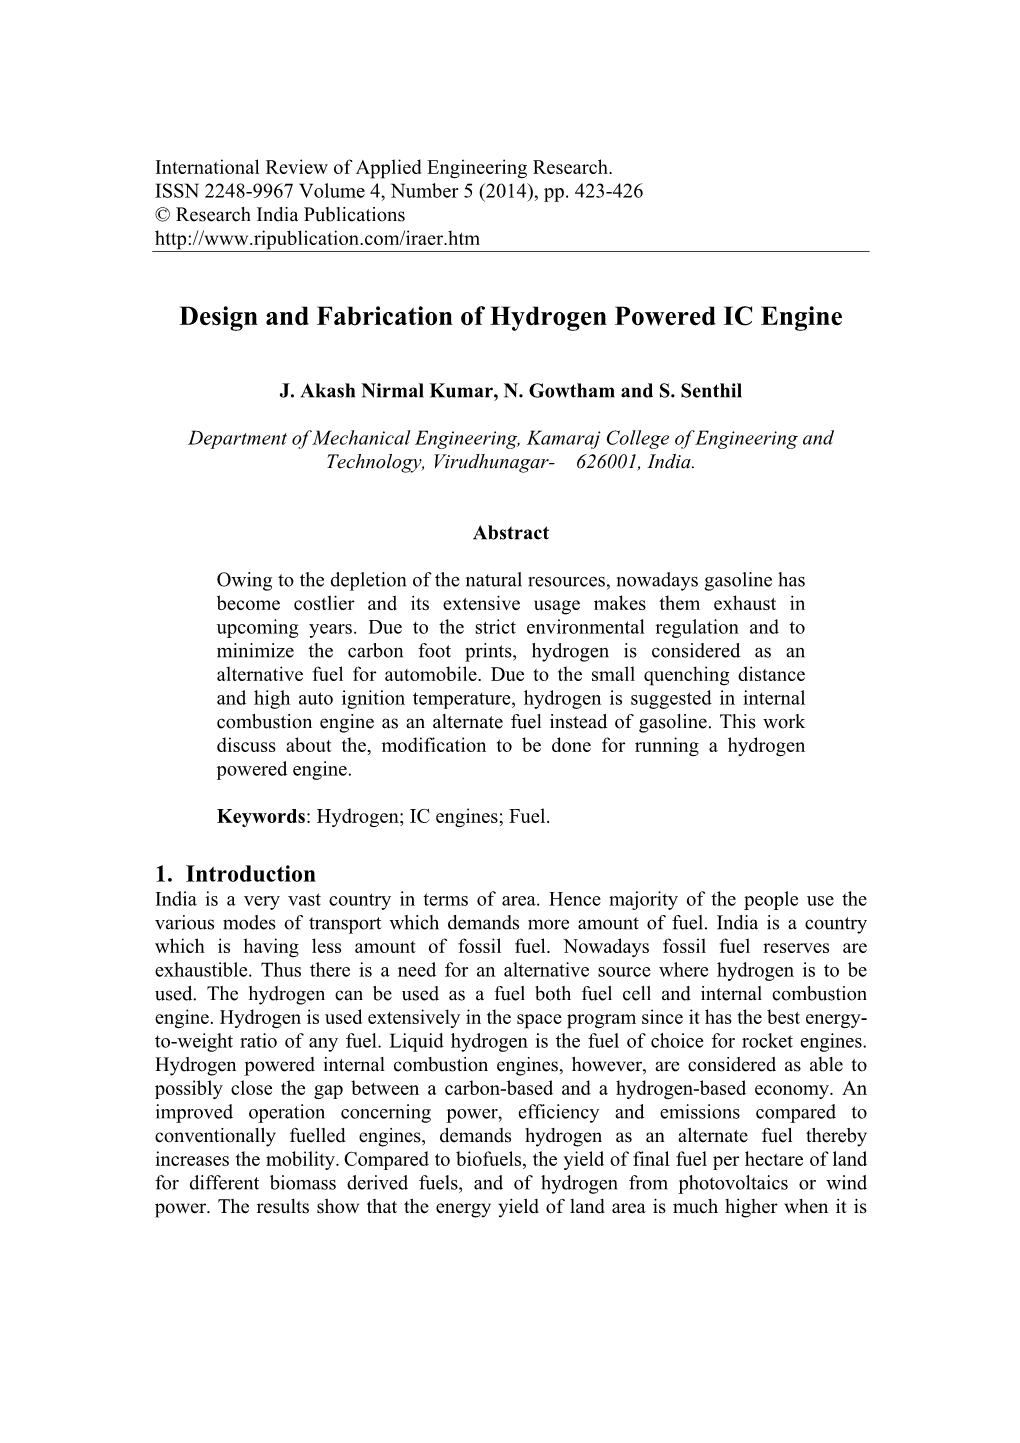 Design and Fabrication of Hydrogen Powered IC Engine